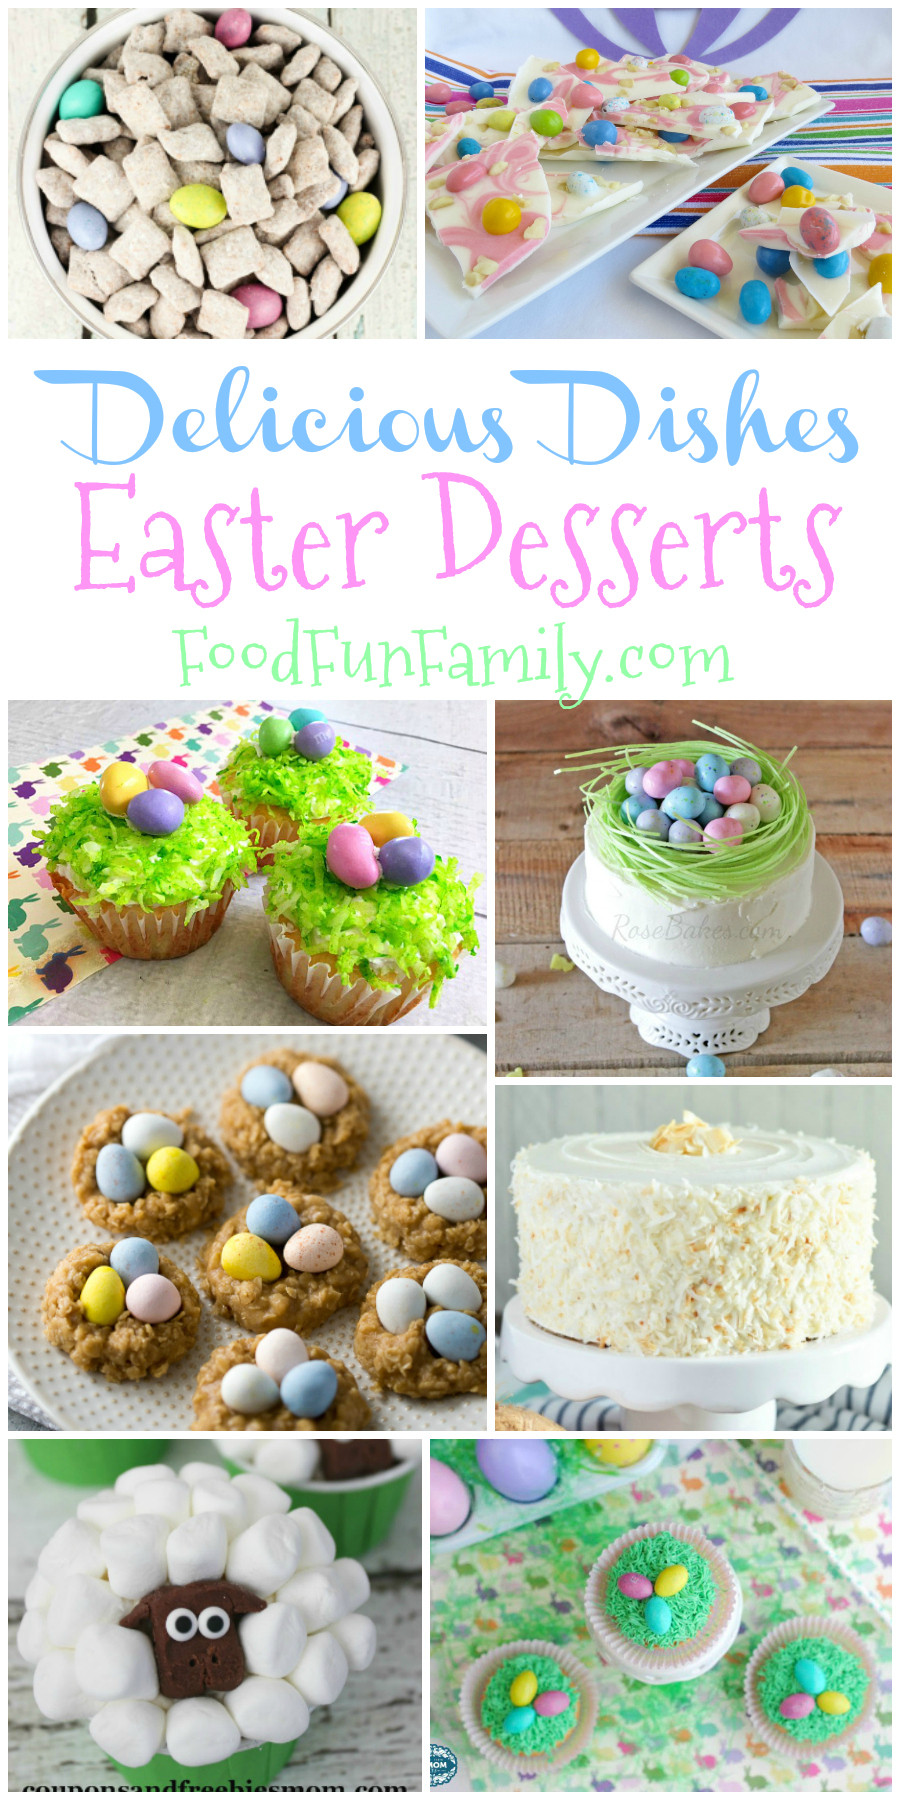 Easter Party Food Ideas Pinterest
 Wel e Spring Easter Dessert Recipes Delicious Dishes